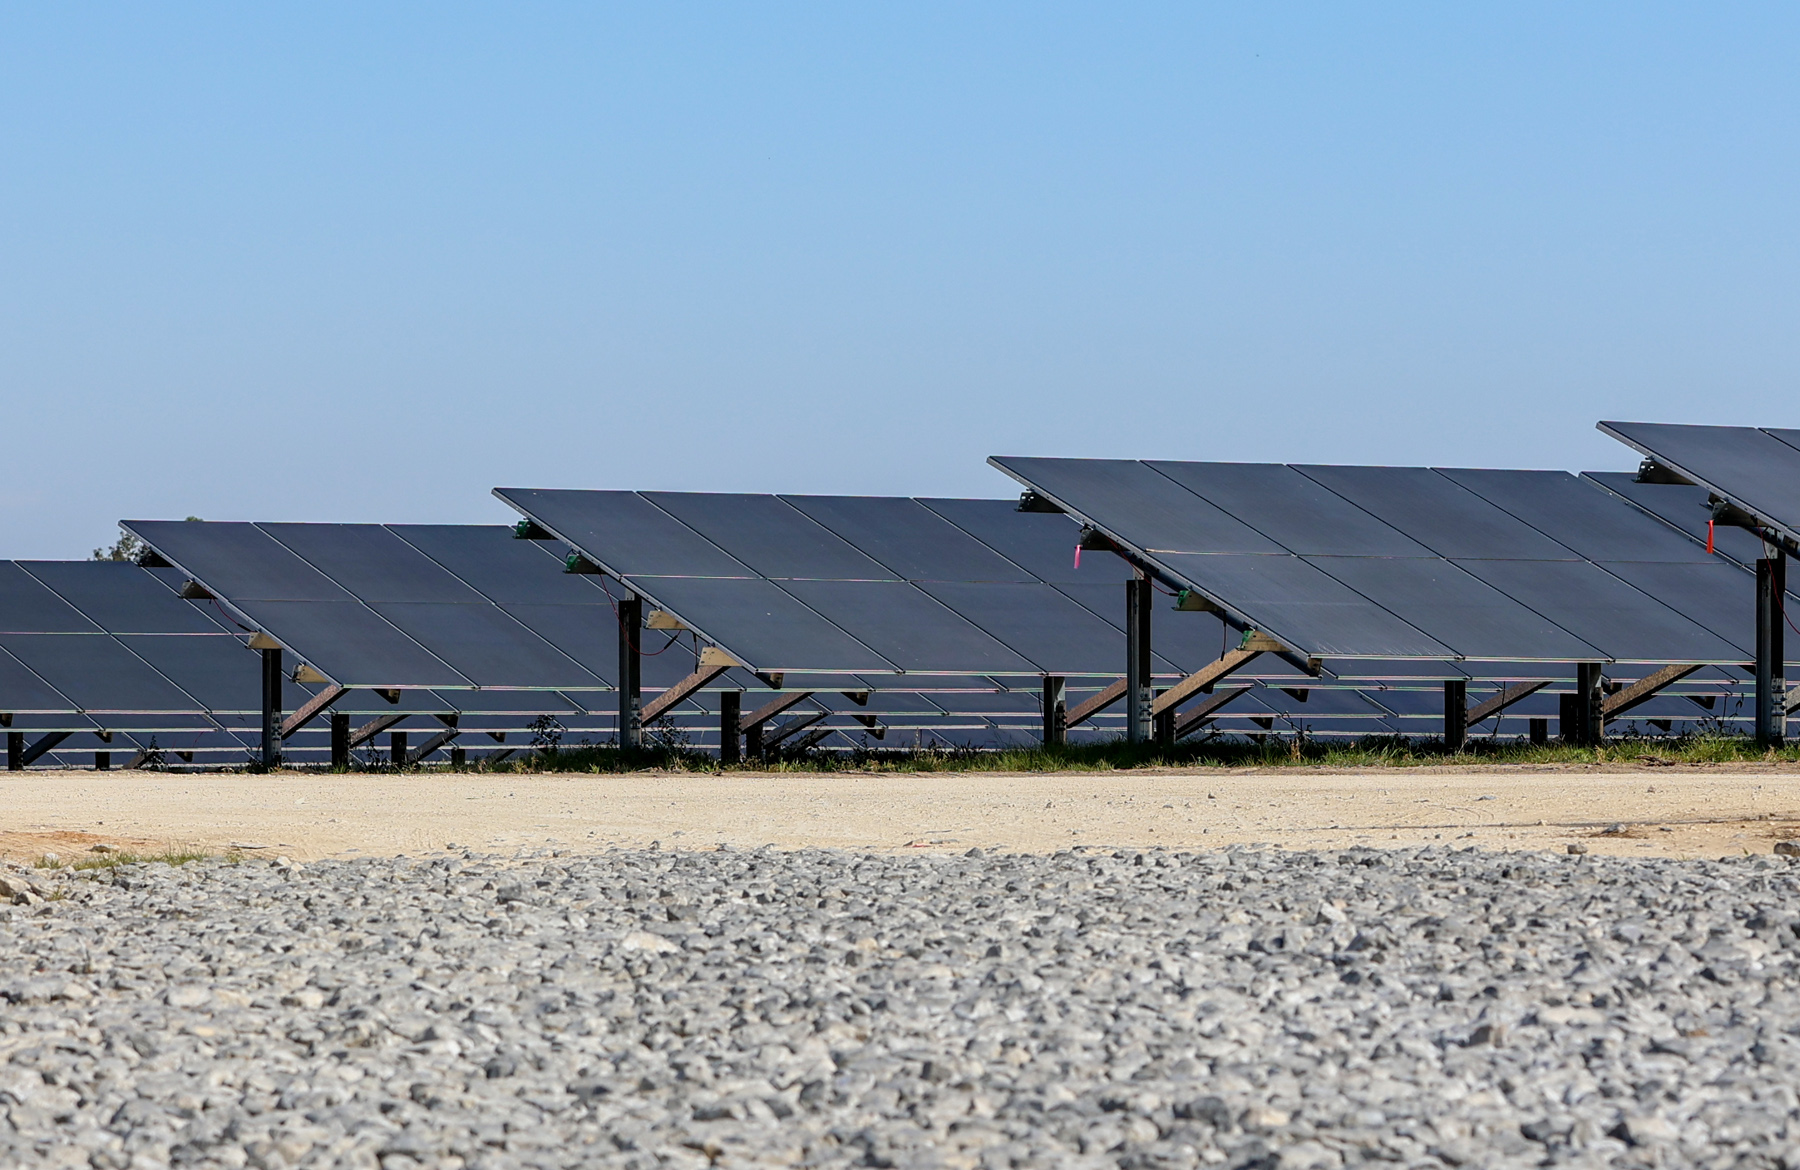 construction-at-halfway-point-on-new-fpl-solar-farm-in-mcdavid-it-s